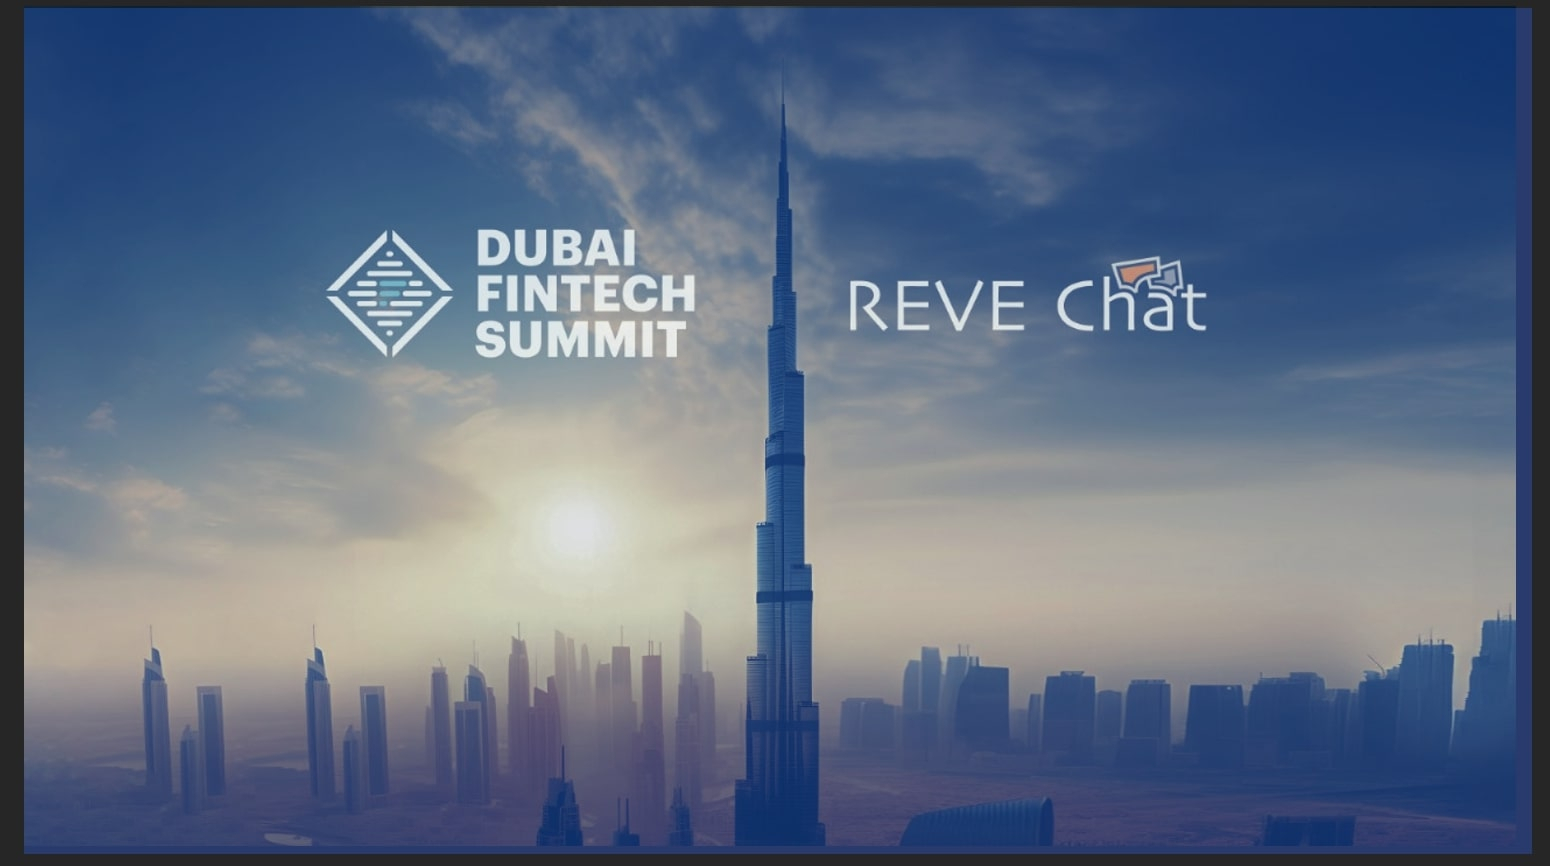 REVE Chat to Participate in the Dubai Fintech Summit 2024 to Showcase its Versatile Customer Engagement Platform for BFSIs [Video]